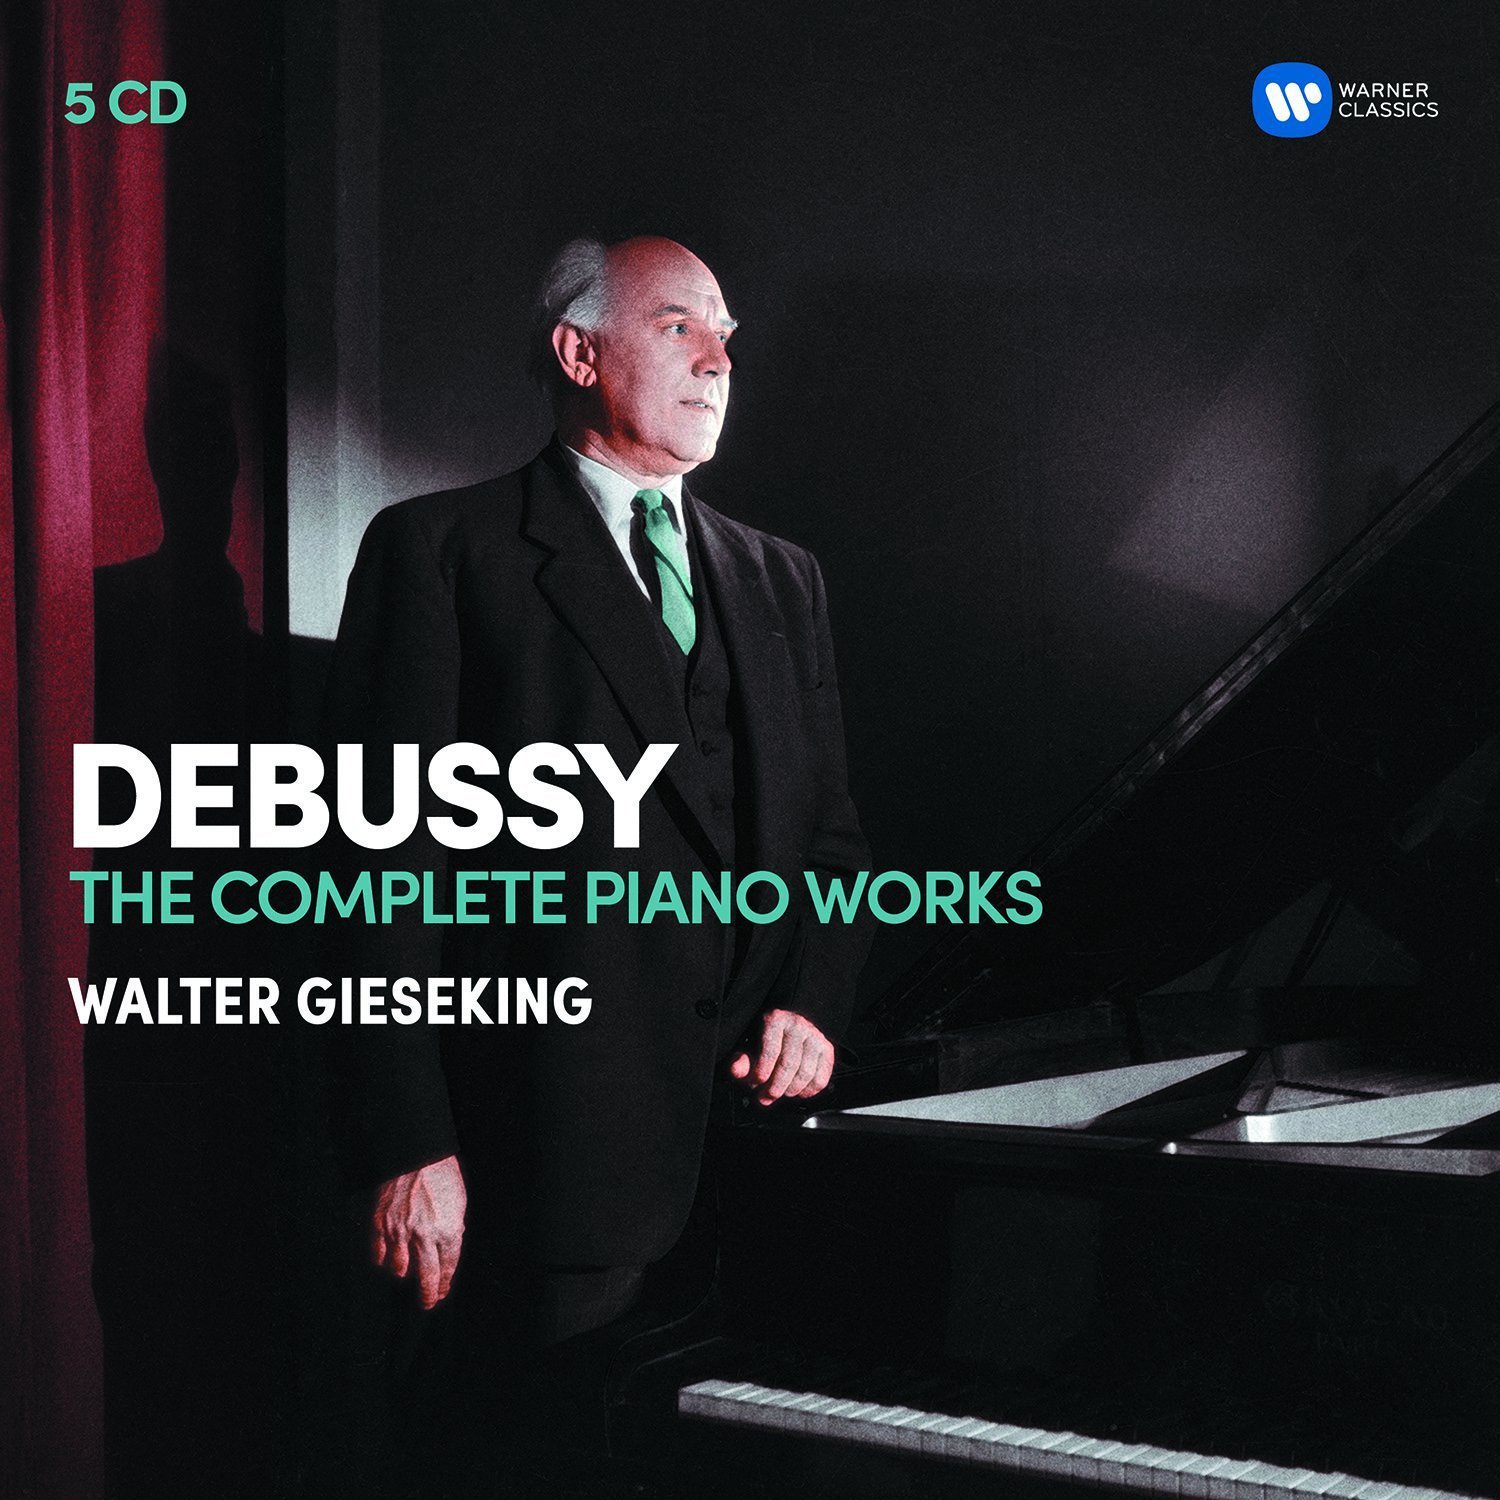 Debussy: The Complete Piano works - Box set | Walter Gieseking